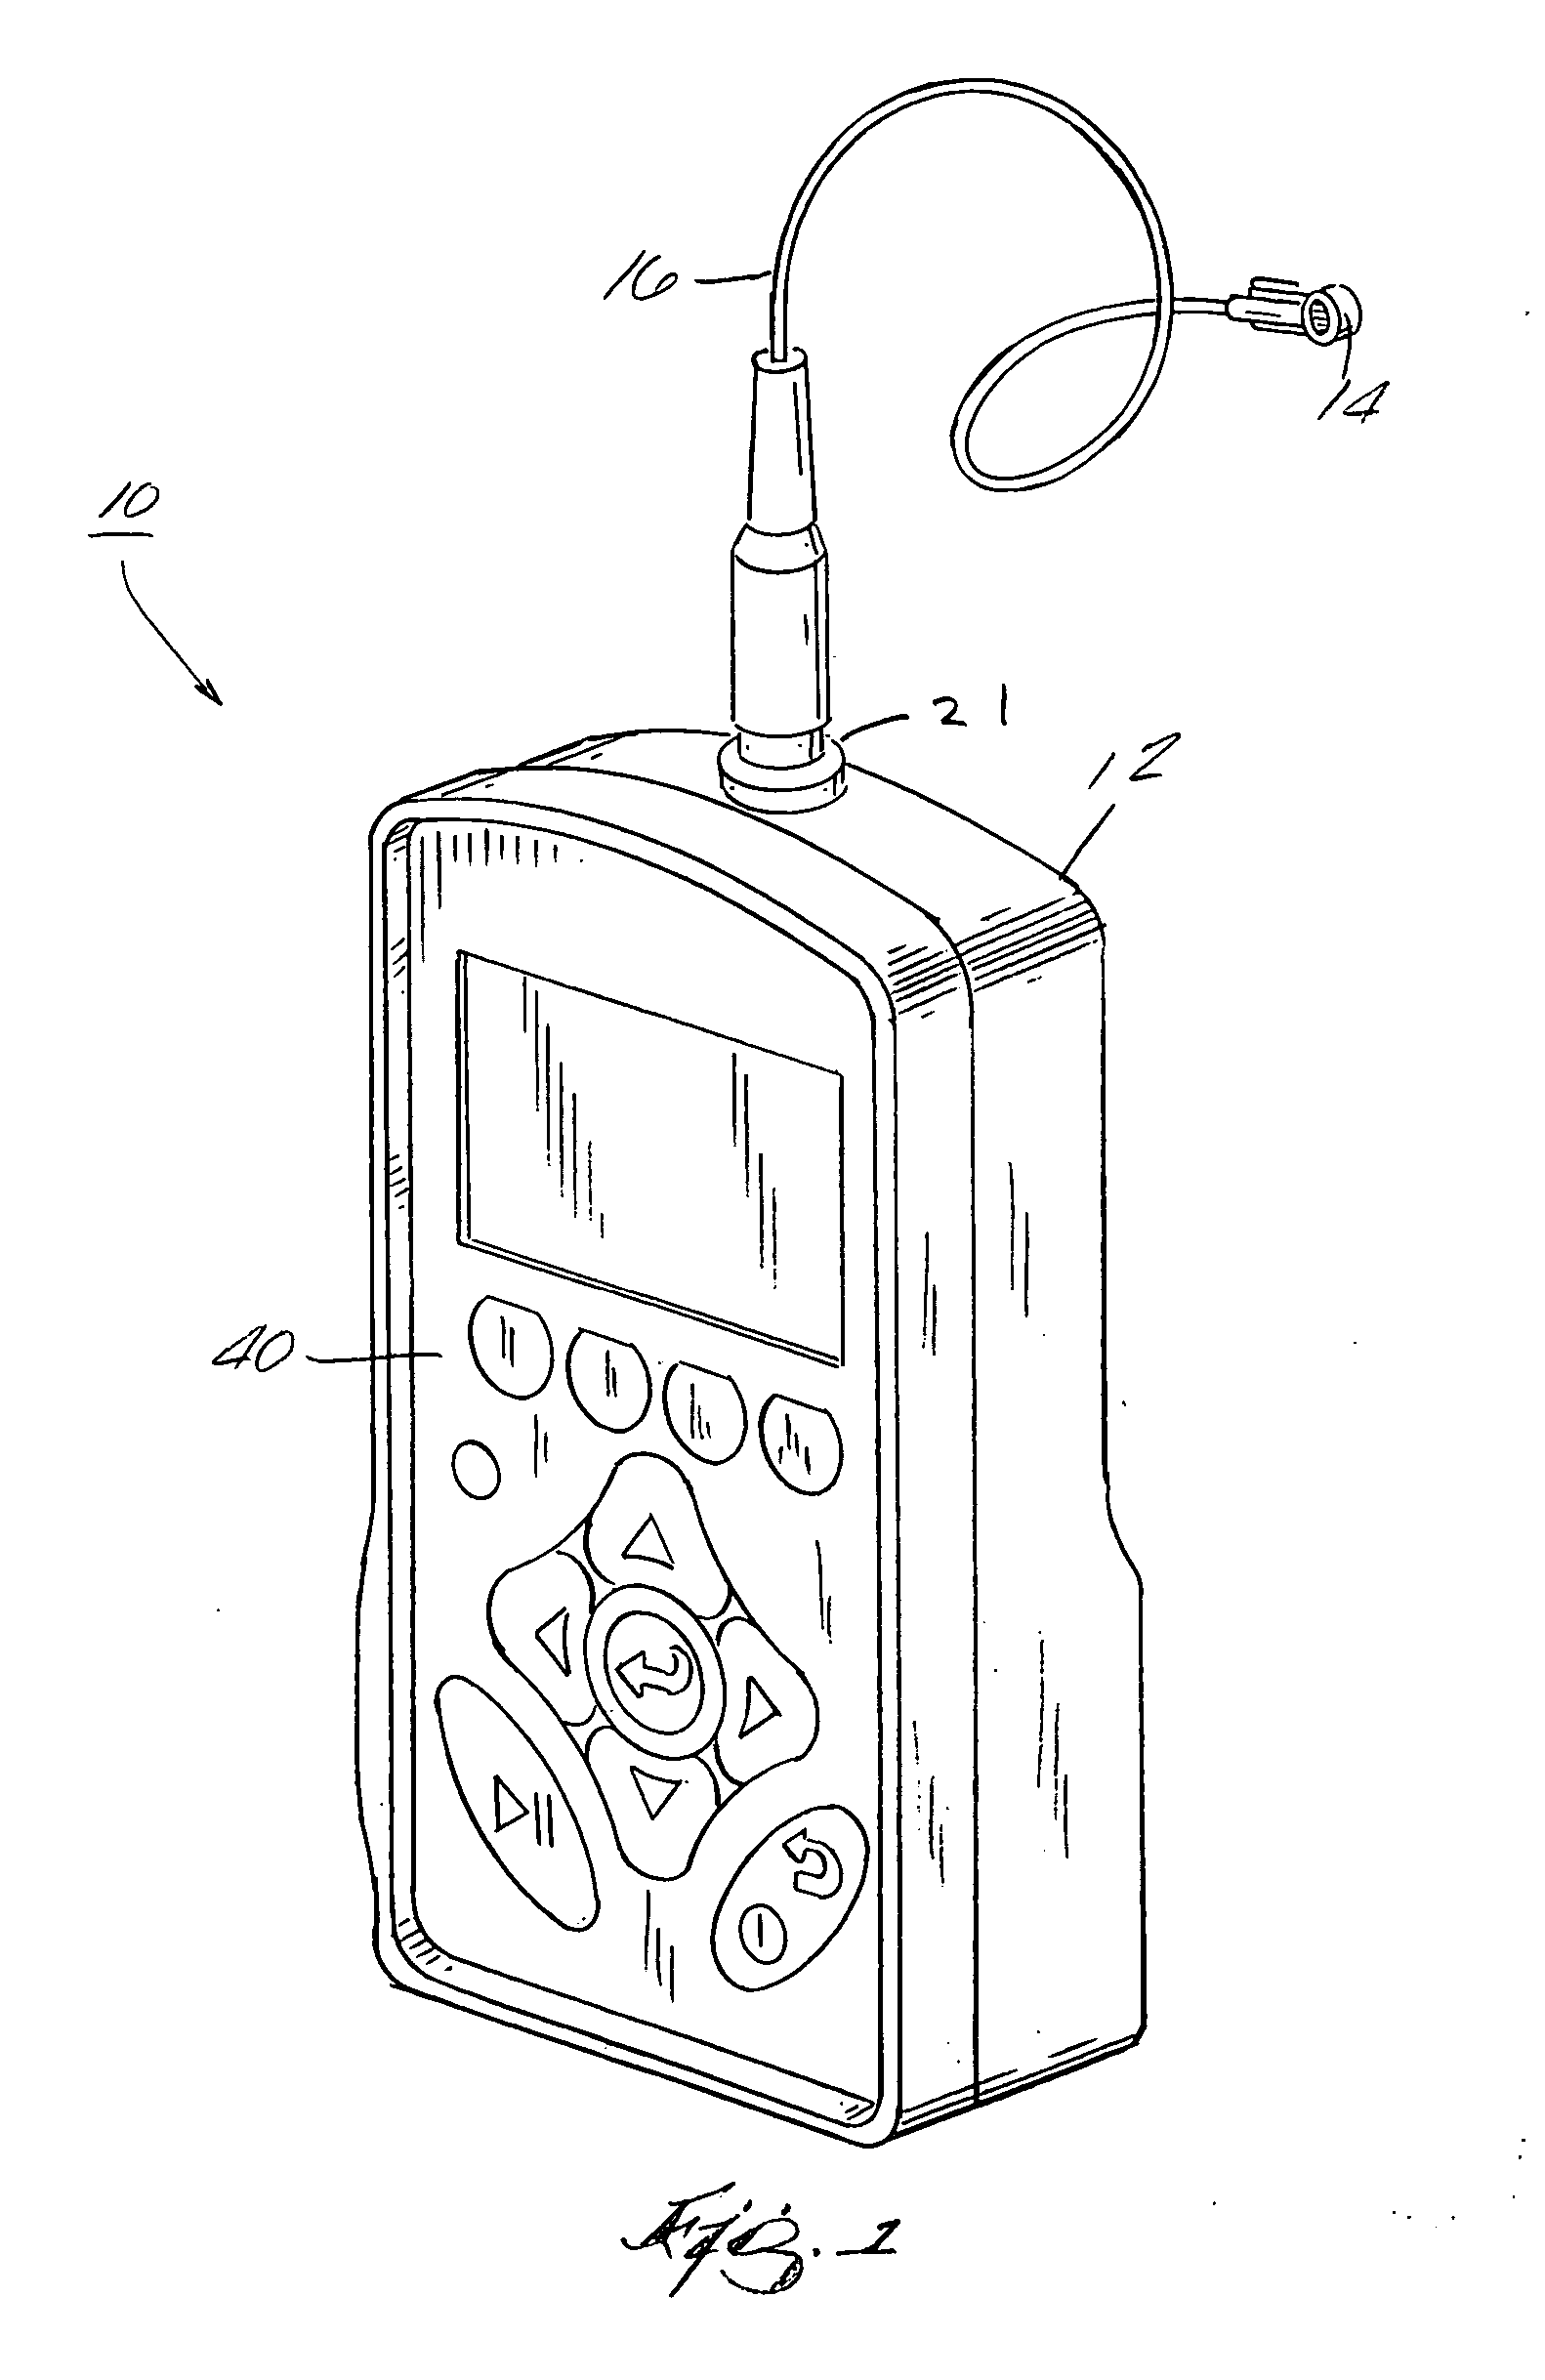 Noise exposure monitoring device